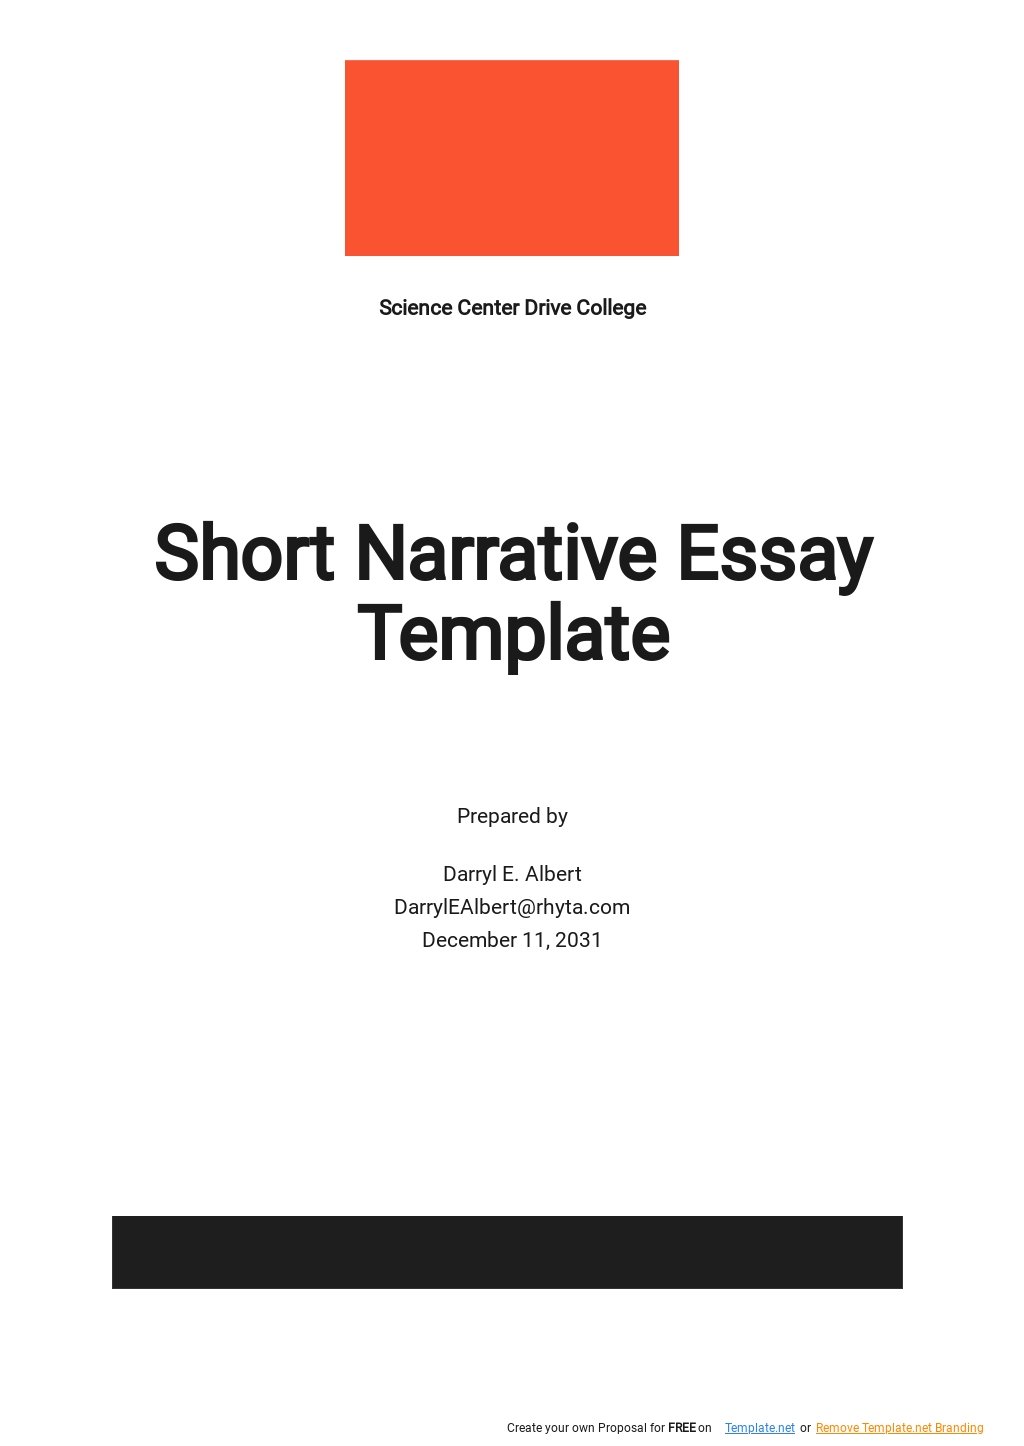 Short Narrative Essay Template in Word, Google Docs, Apple Pages